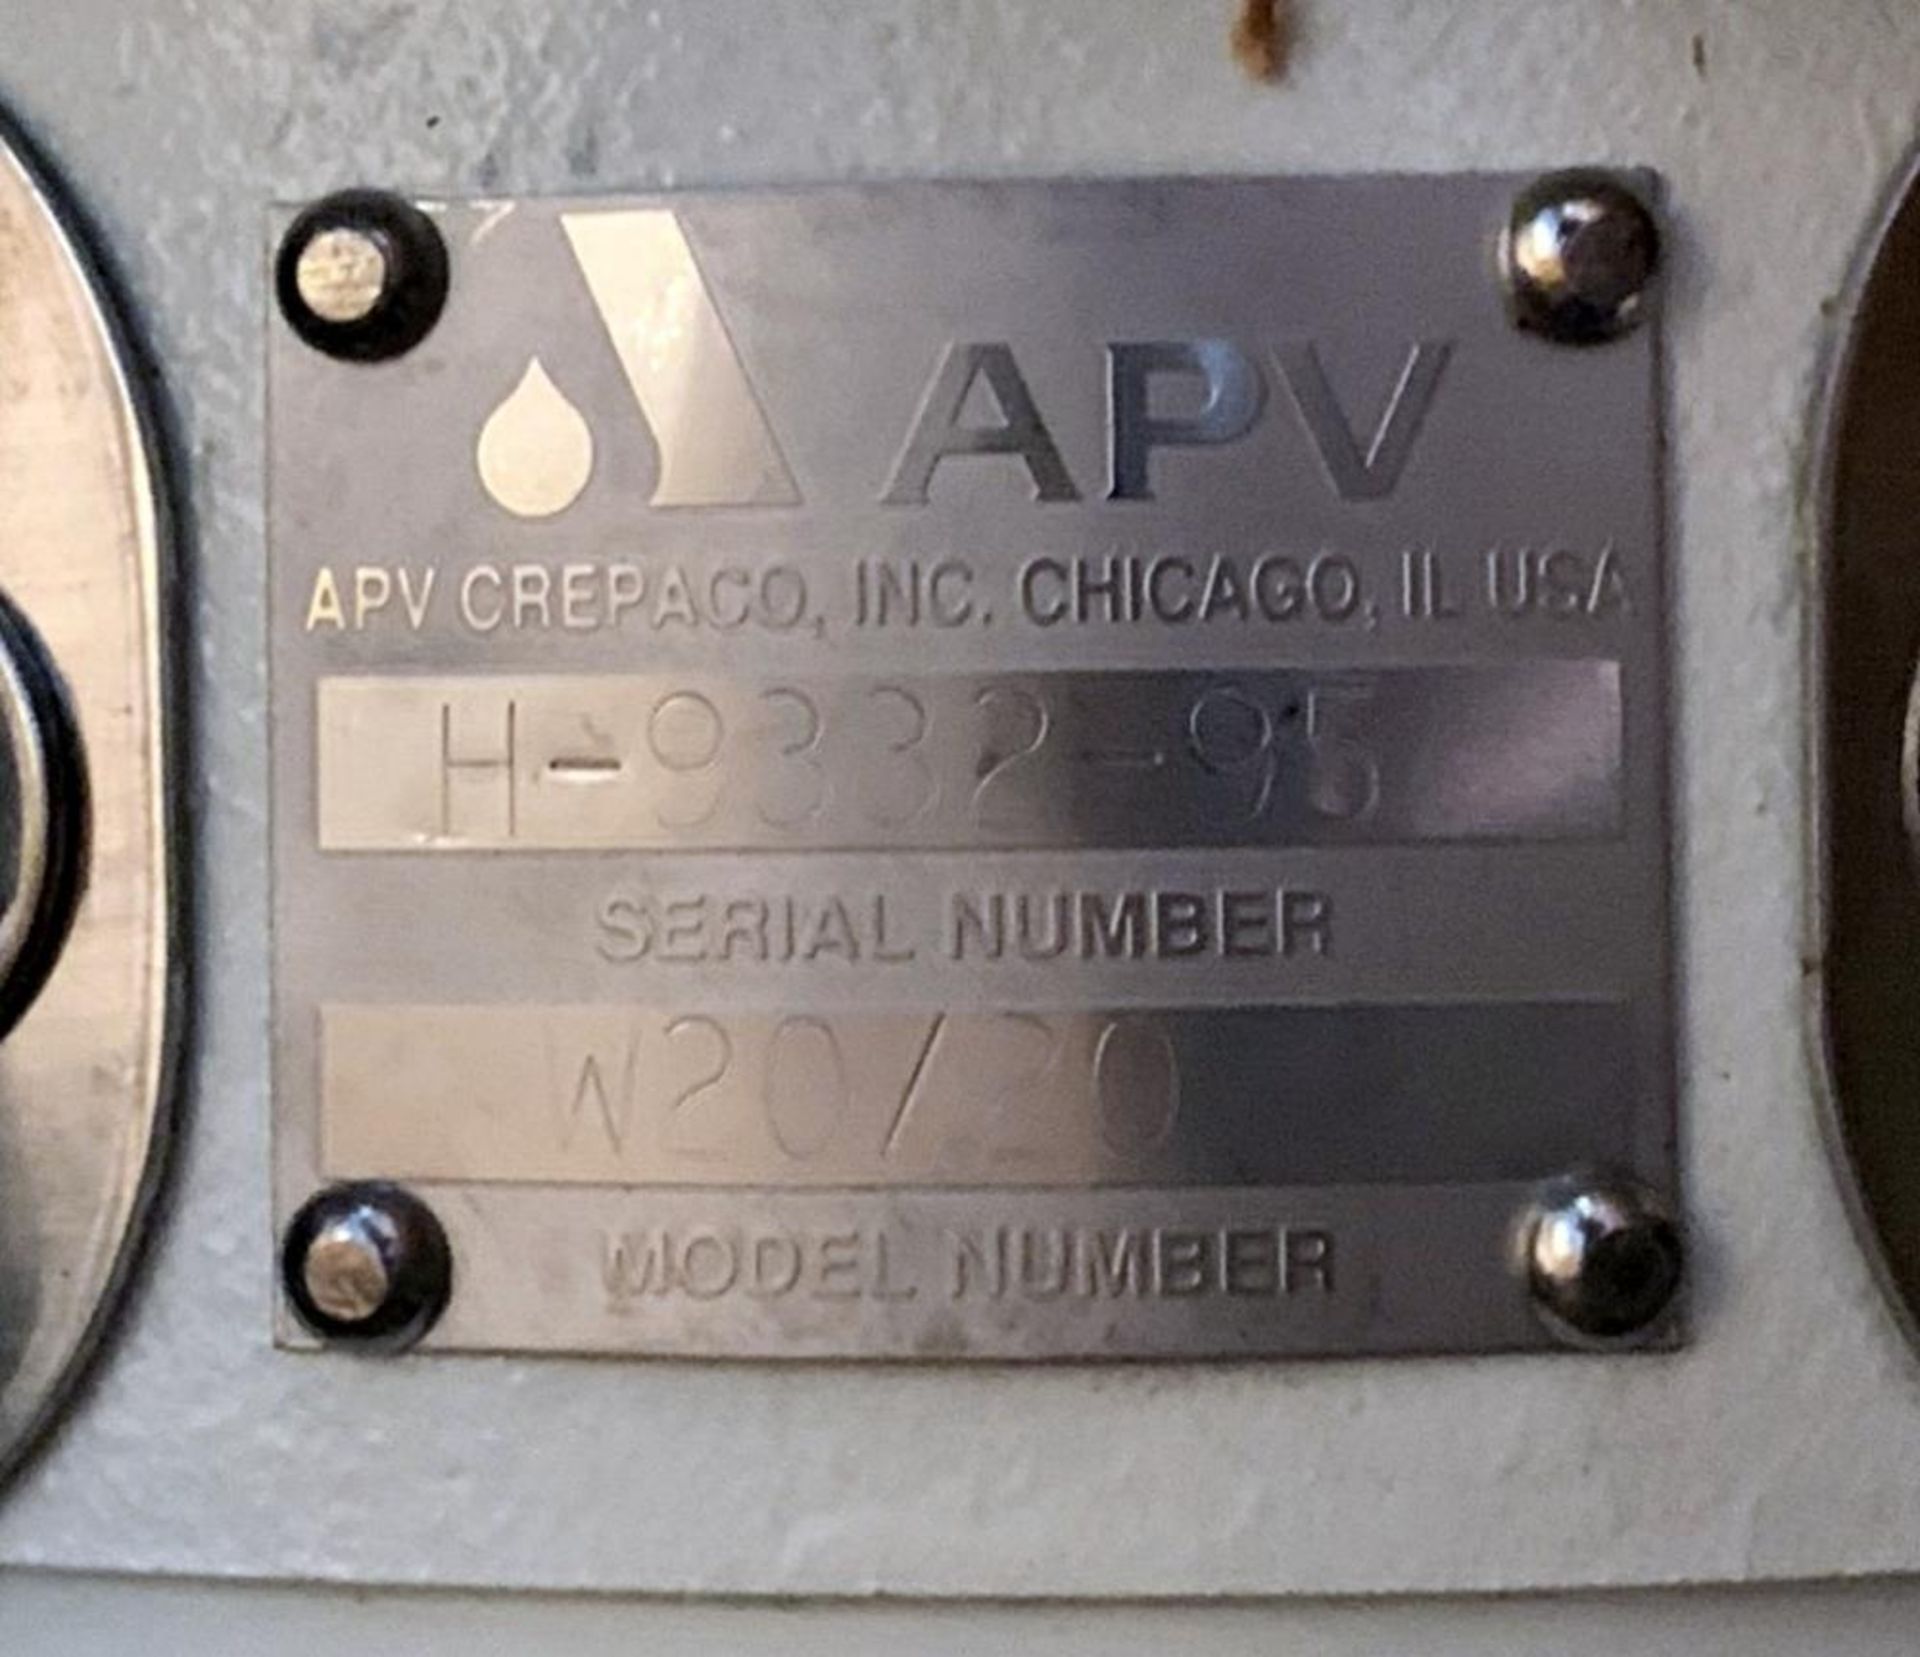 Unused- APV Crepaco Centrifugal Pump, Stainless Steel, Model W20/20. Approximate 105 gallons per min - Image 7 of 8